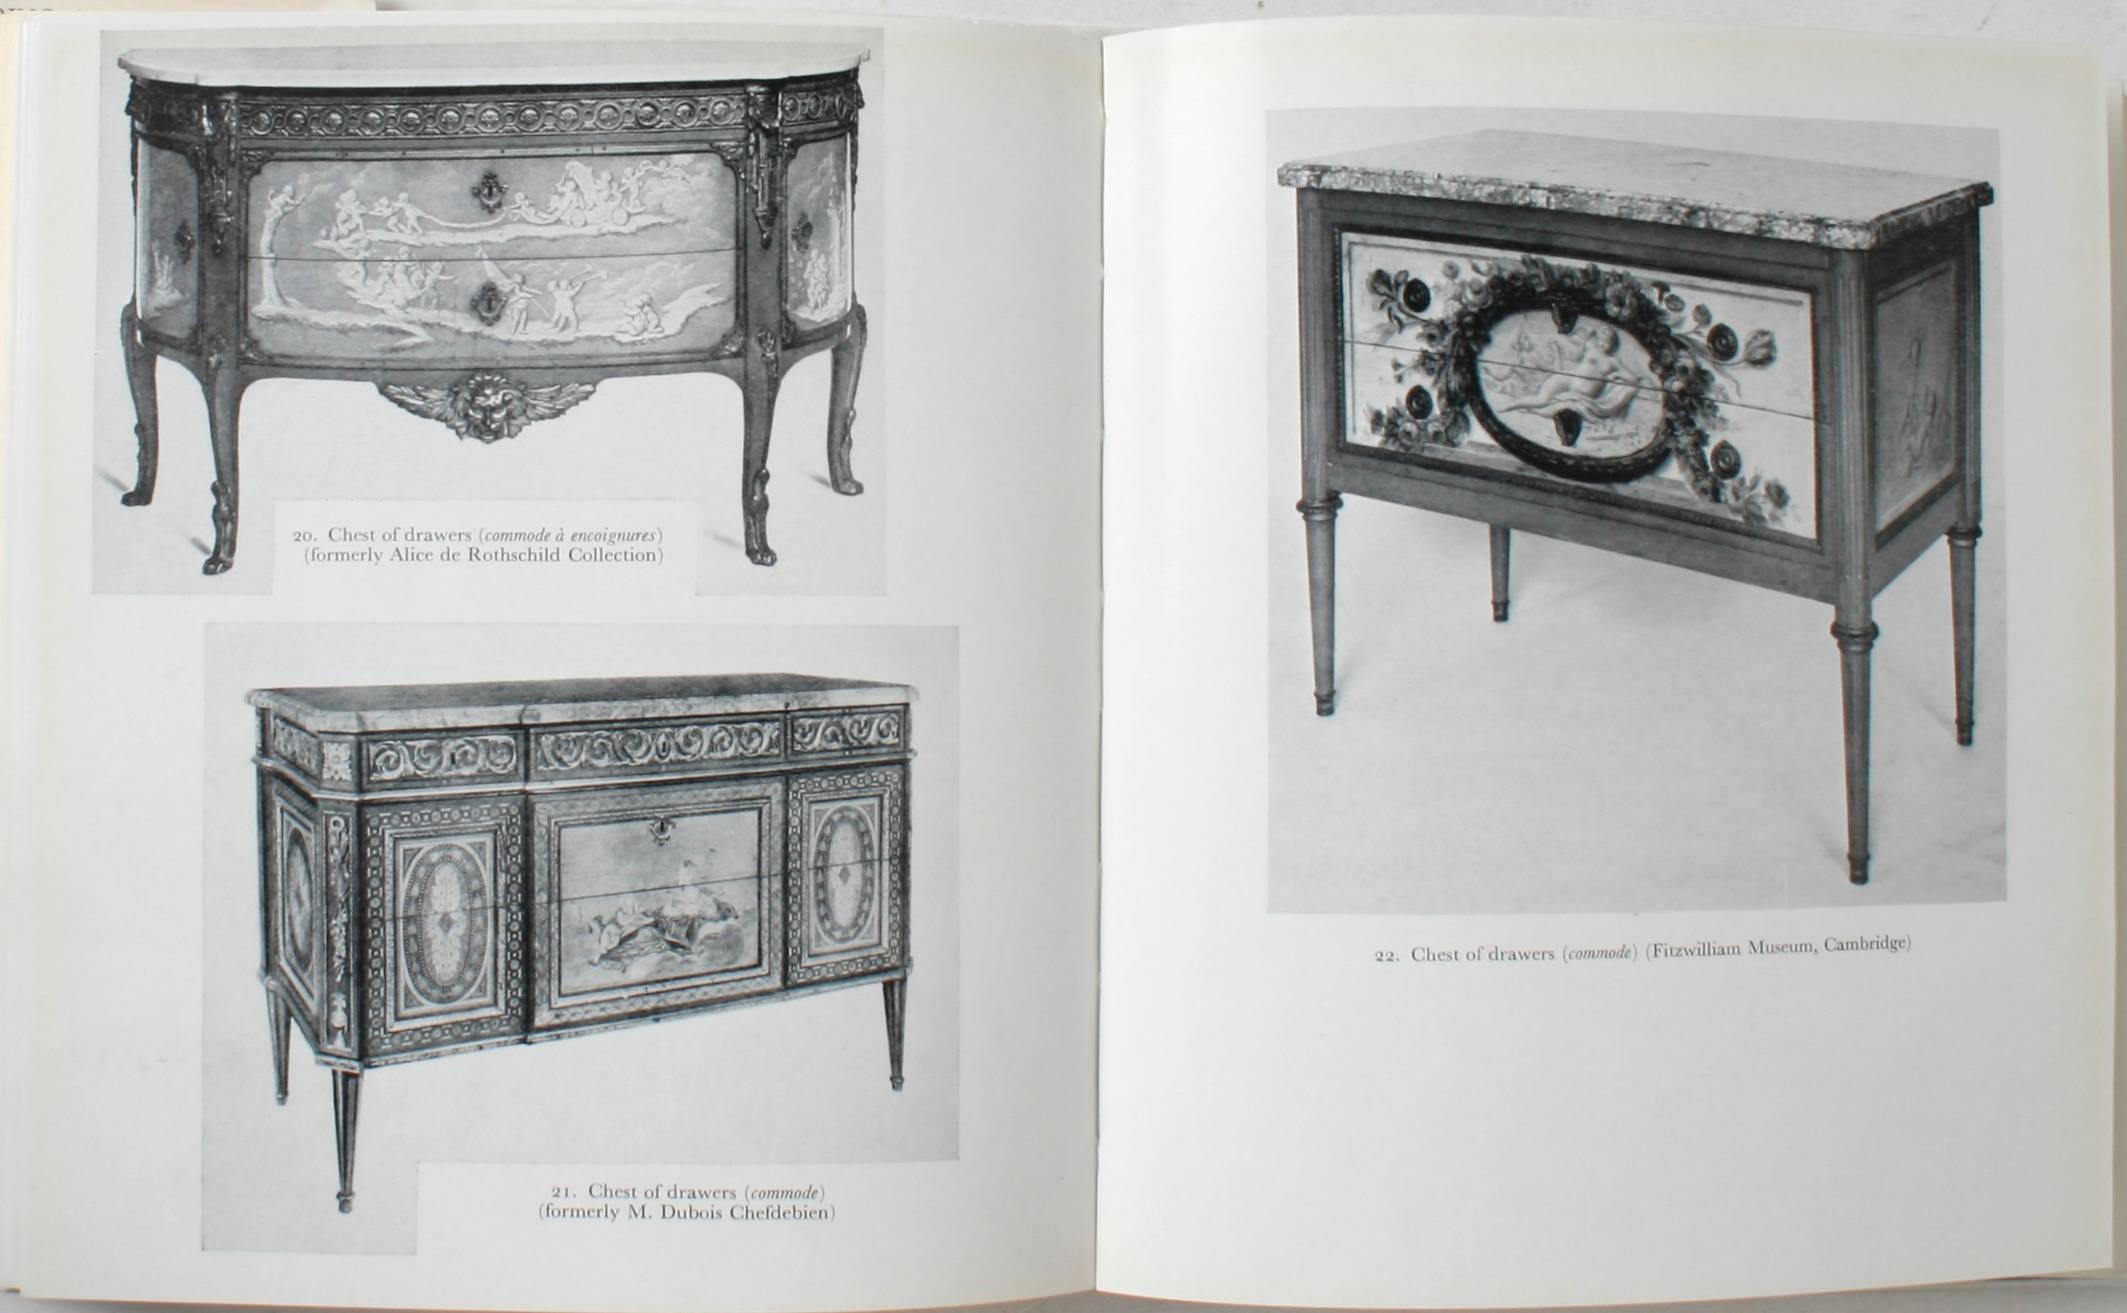 Louis XVI Furniture by F.J.B.Watson. London: Alec Tiraniti, 1960. First edition hardcover with dust jacket. 404 pp. An invaluable resource book on Louis XVI furniture with 242 black and white plates. In the 18th c the development of the luxury arts